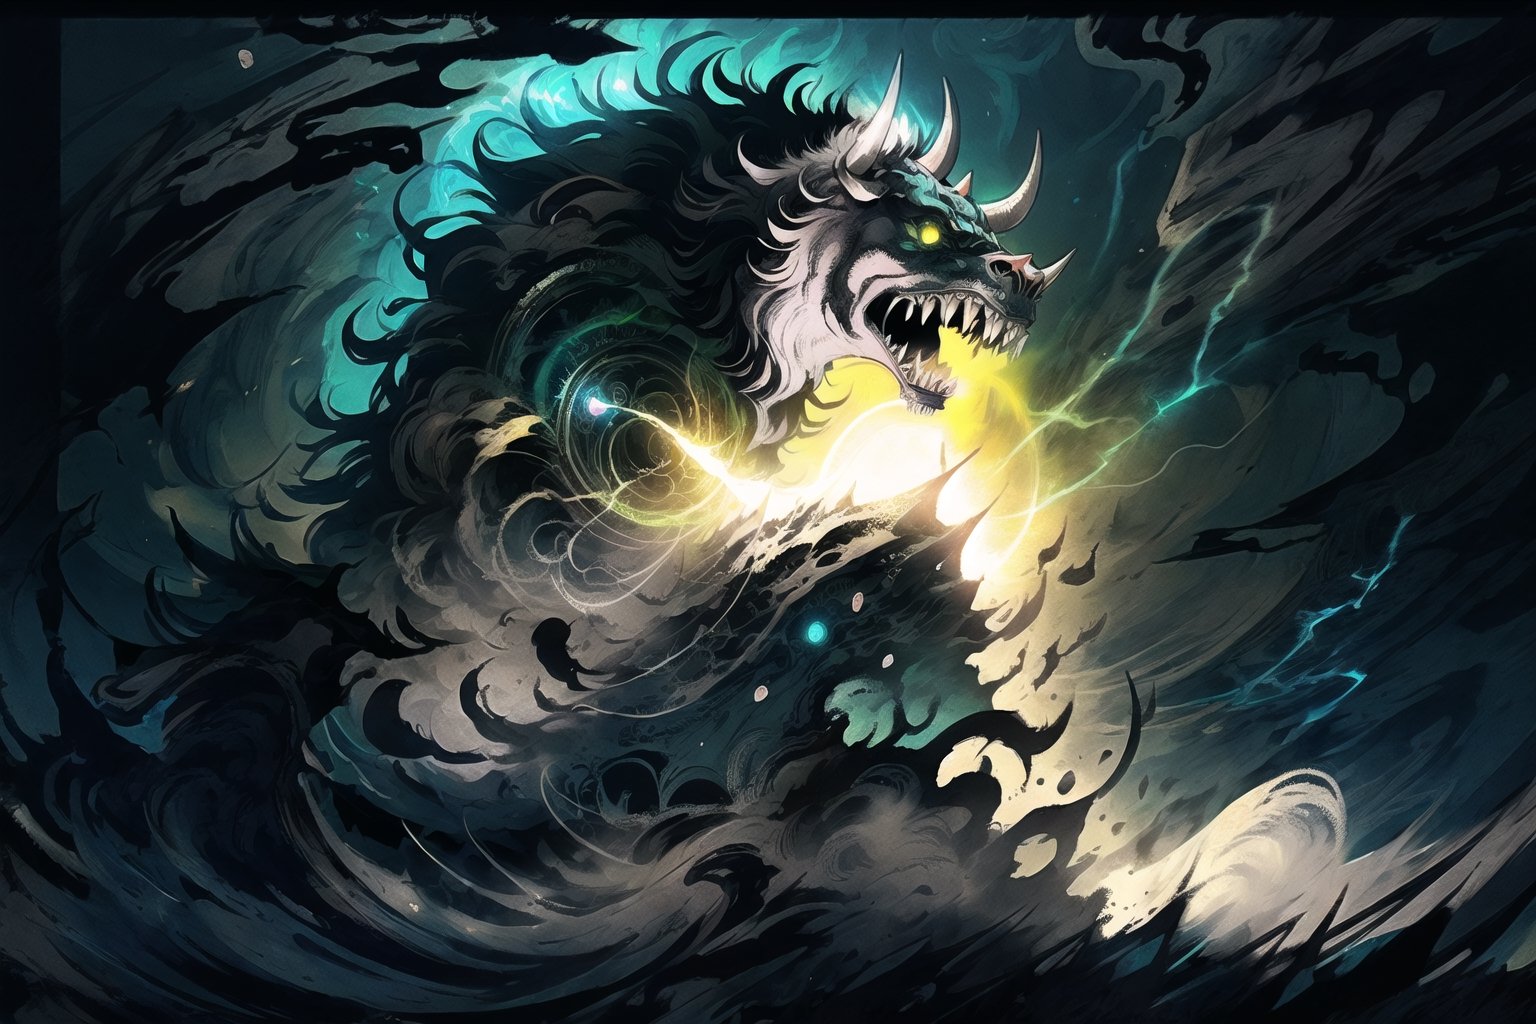  In the realm of digital illustration, imagine a ferocious cow monster in a grassy expanse, illustrated with vibrant energy akin to the style of Lois van Baarle. The bull monster charges, surrounded by swirling dust, emitting a primal roar. The color palette is bold and saturated, amplifying the monster's menacing presence. Facial details are intricately depicted, showcasing a mix of rage and power. Illuminated by a surreal, otherworldly light source, the atmosphere is charged with tension.

300 DPI, HD, 8K, Best Perspective, Best Lighting, Best Composition, Good Posture, High Resolution, High Quality, 4K Render, Highly Denoised, Clear distinction between object and body parts, Masterpiece, Beautiful face, 
Beautiful body, smooth skin, glistening skin, highly detailed background, highly detailed clothes, 
highly detailed face, beautiful eyes, beautiful lips, cute, beautiful scenery, gorgeous, beautiful clothes, best lighting, cinematic , great colors, great lighting, masterpiece, Good body posture, proper posture, correct hands, 
correct fingers, right number of fingers, clear image, face expression should be good, clear face expression, correct face , correct face expression, better hand position, unrealistic hand position, ,ghost nocturnal,no_humans